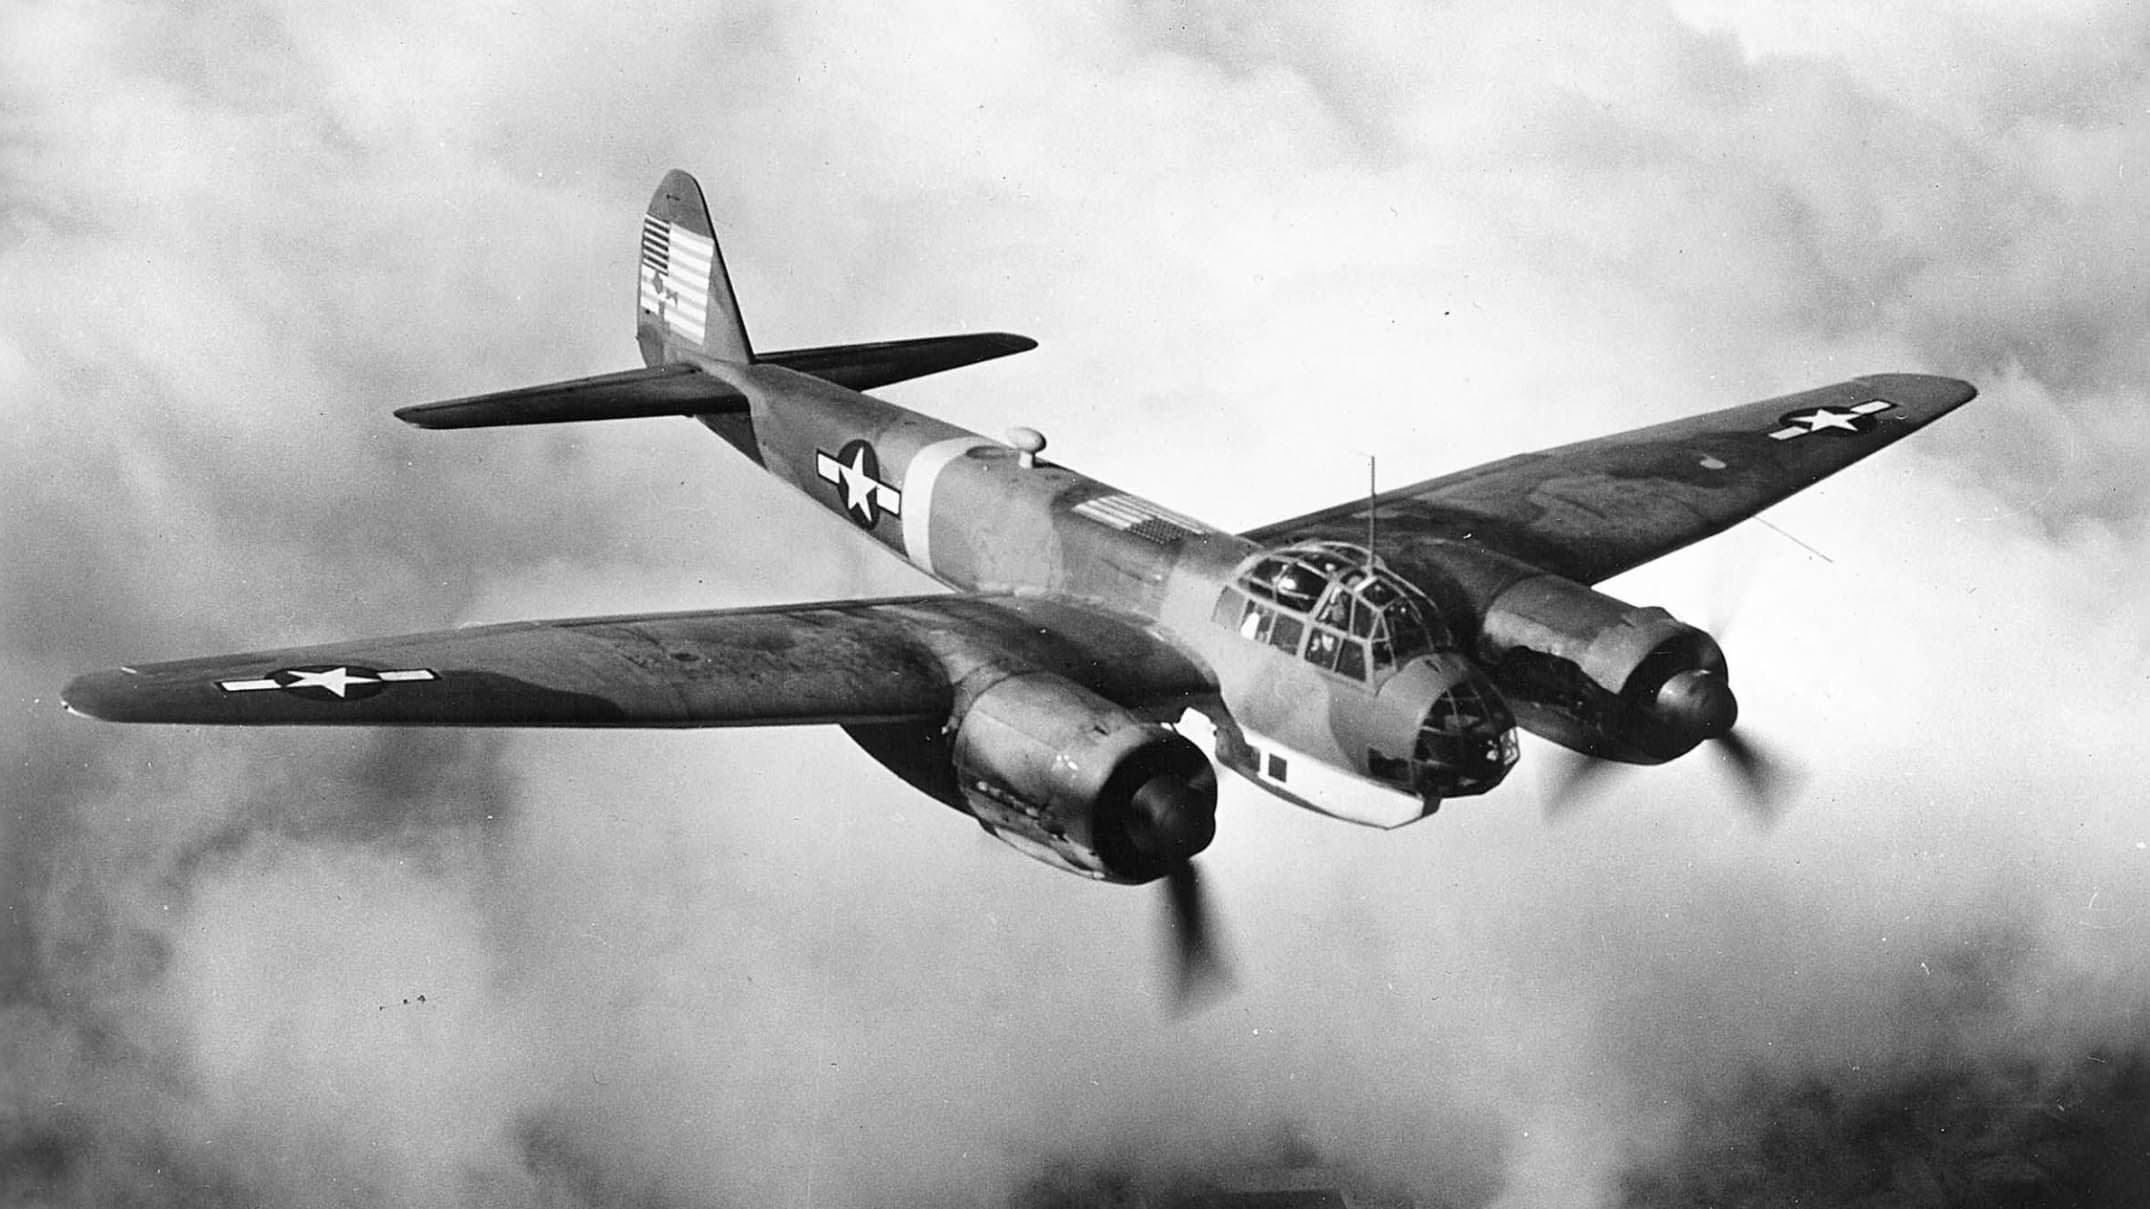 The Amazing Story Of How This Nazi Recon Plane Ended Up Being Tested In The U.S. During WWII